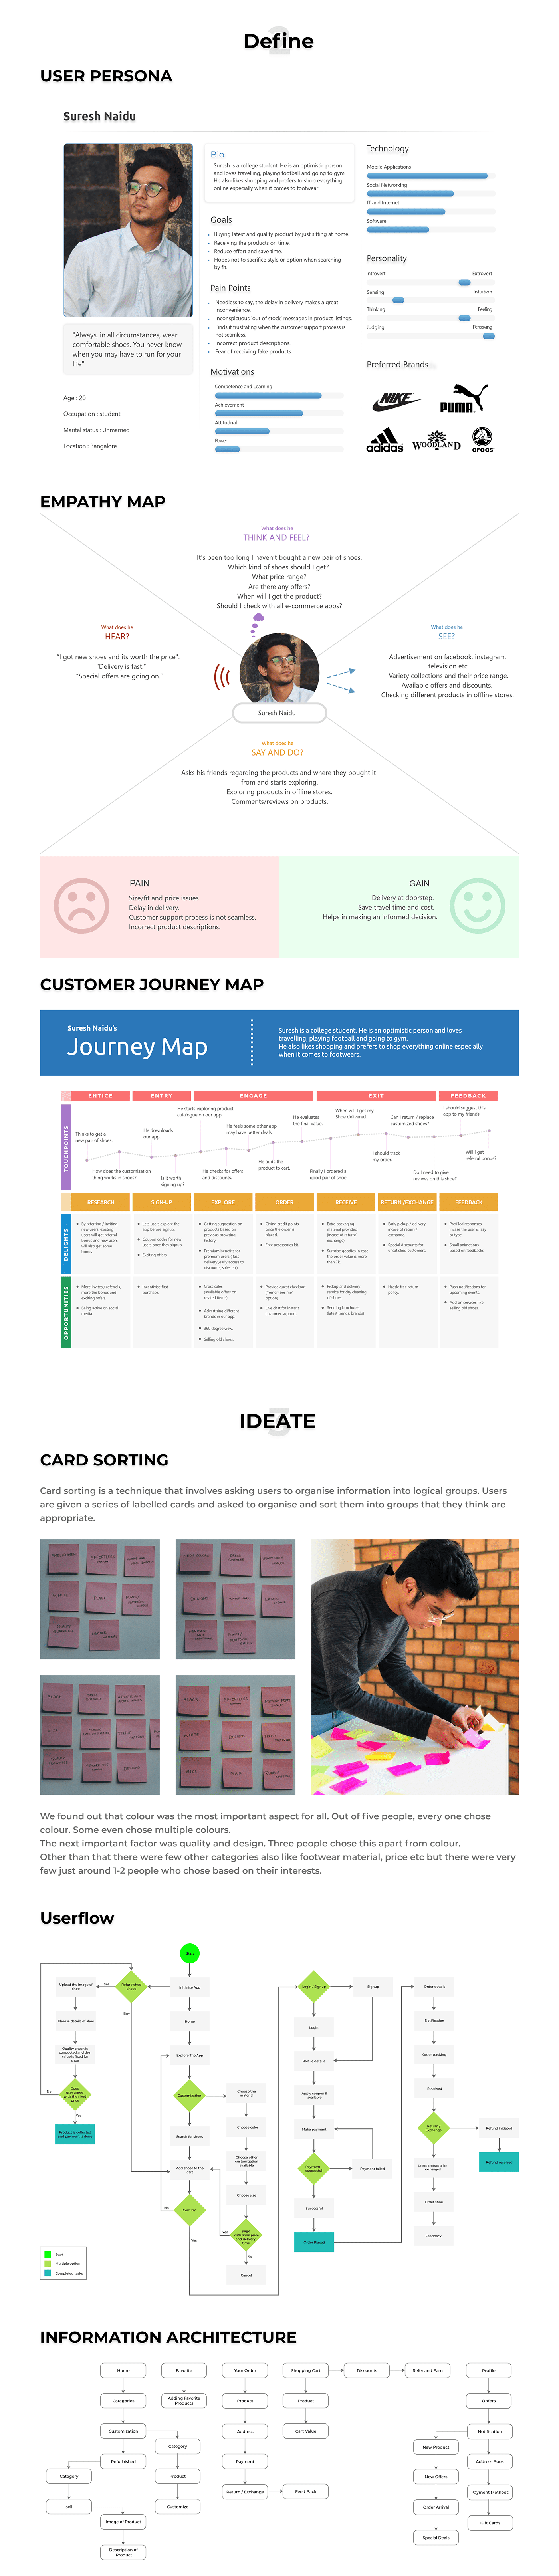 card sorting Case Study Presentation empathy map niche ecommerce persona user flow ux UX Case Study wireframes